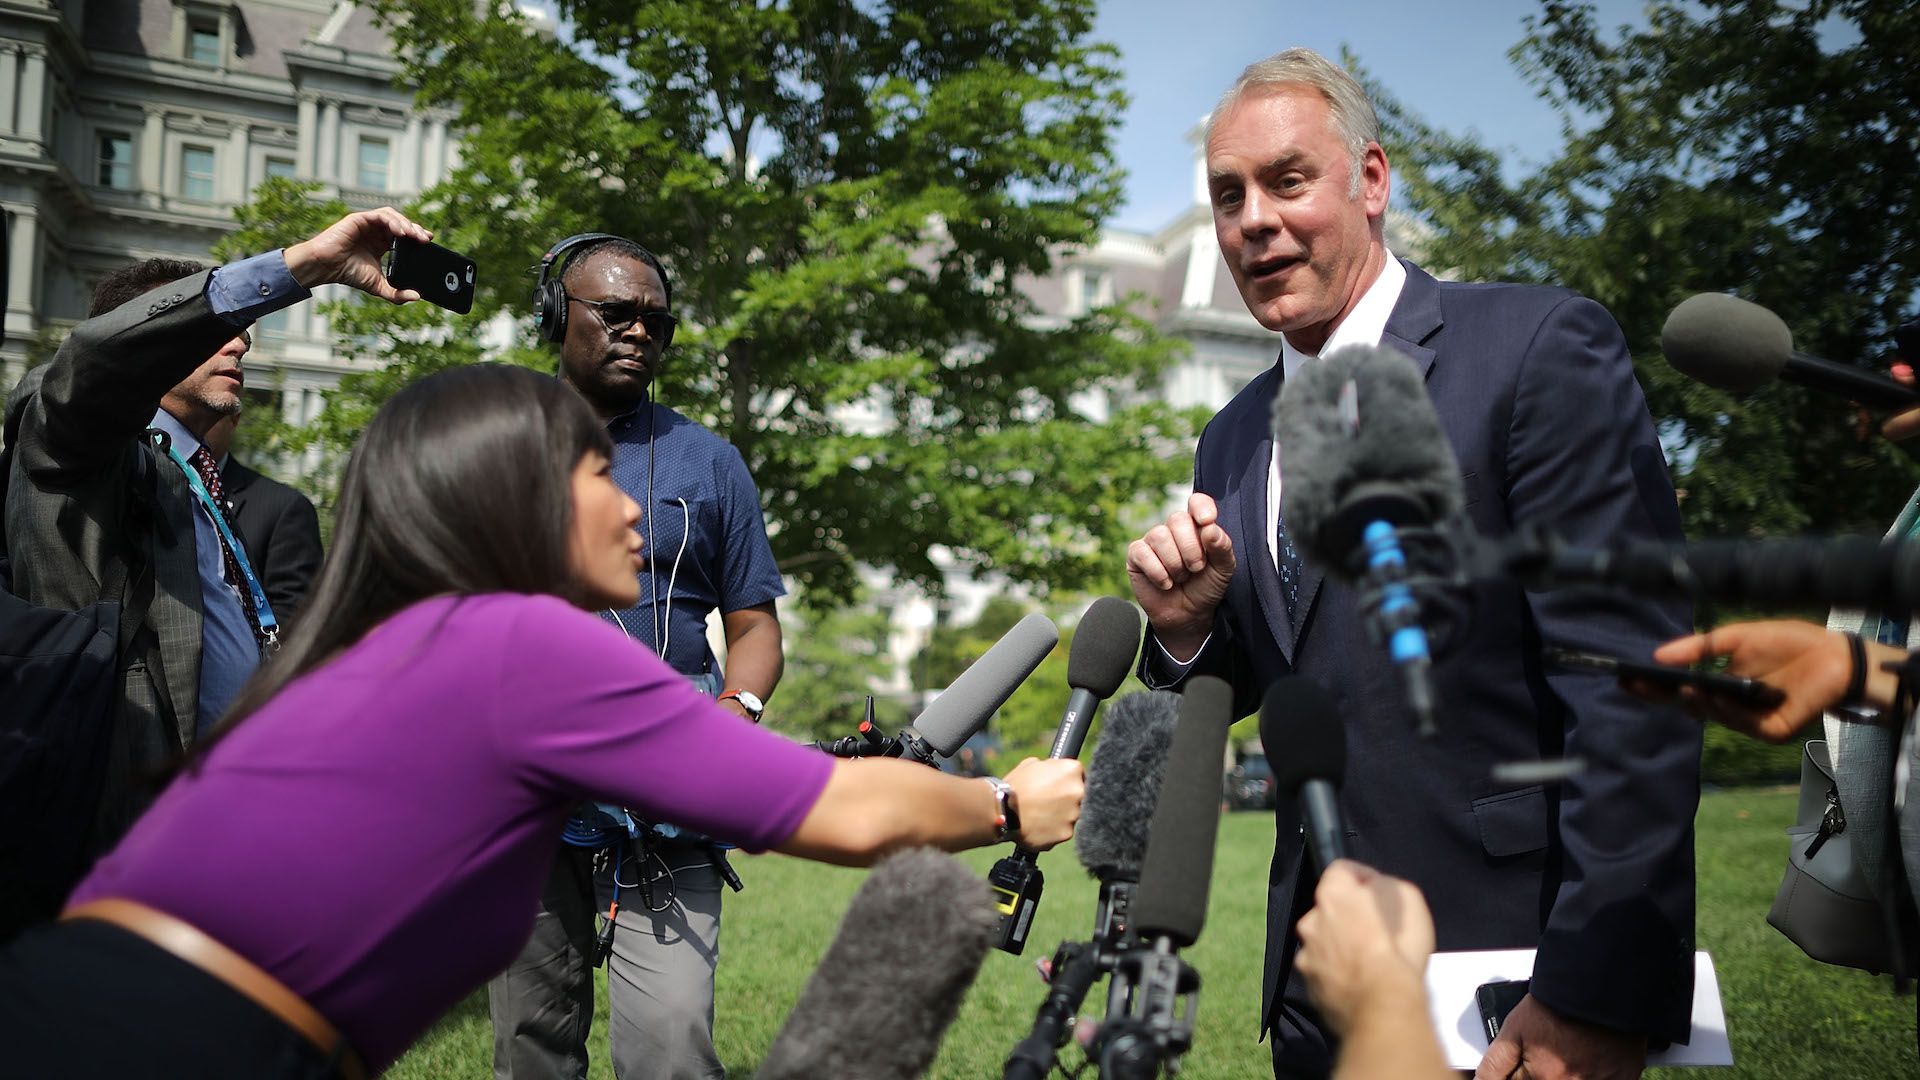 Interior Secretary Ryan Zinke discusses wildfires with press at the White House.